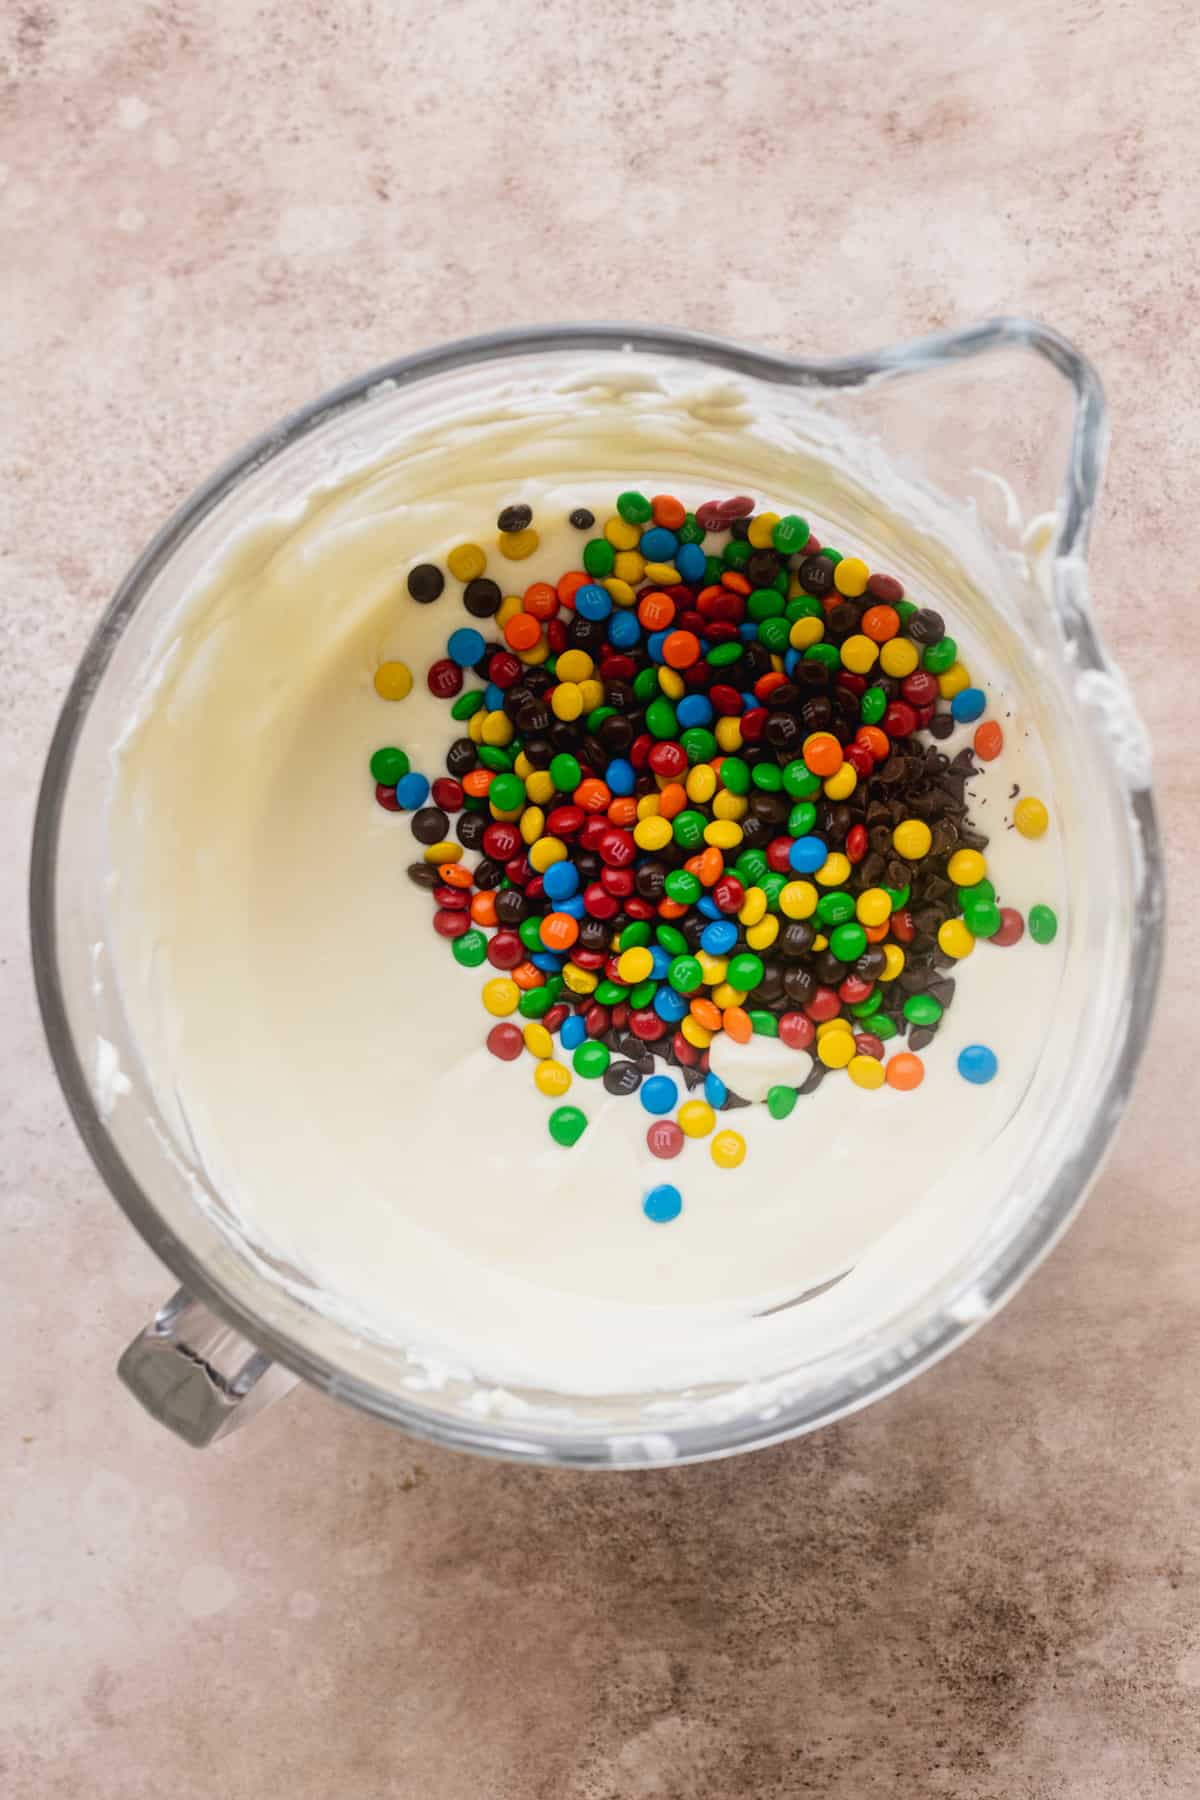 M&Ms on top of cheesecake batter.